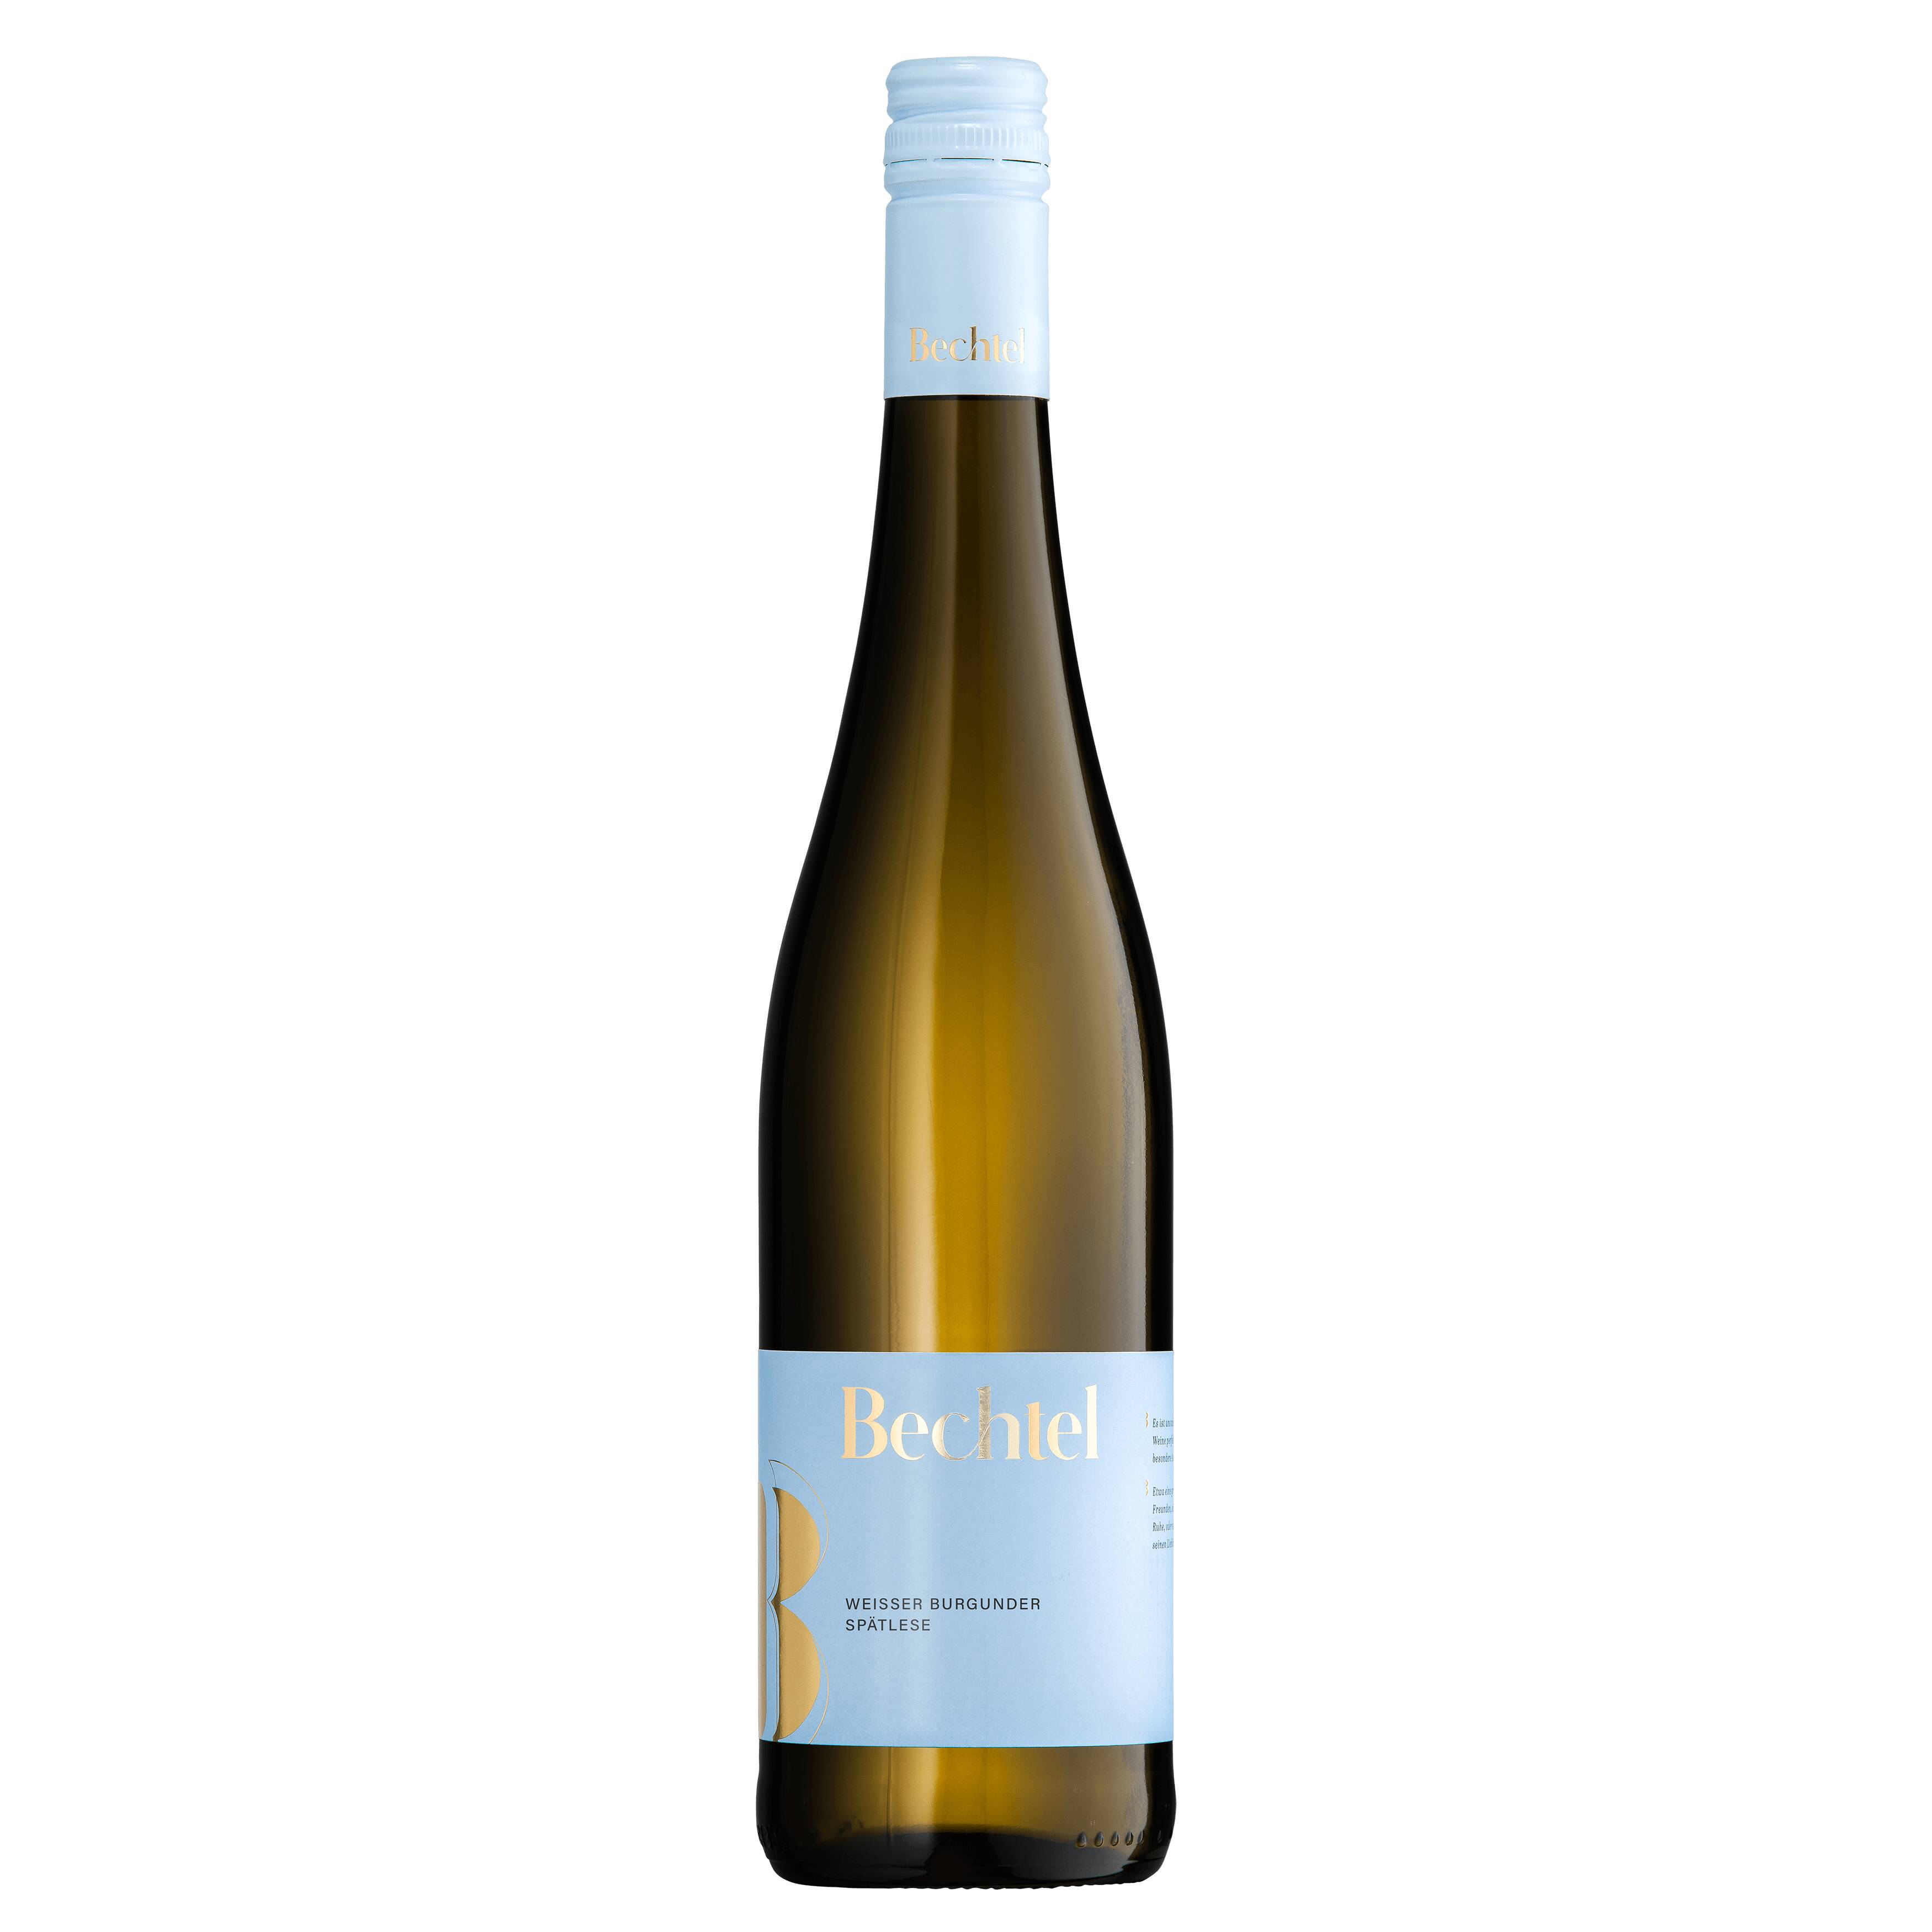 our The | wein.plus wines of Find+Buy: members wein.plus Find+Buy